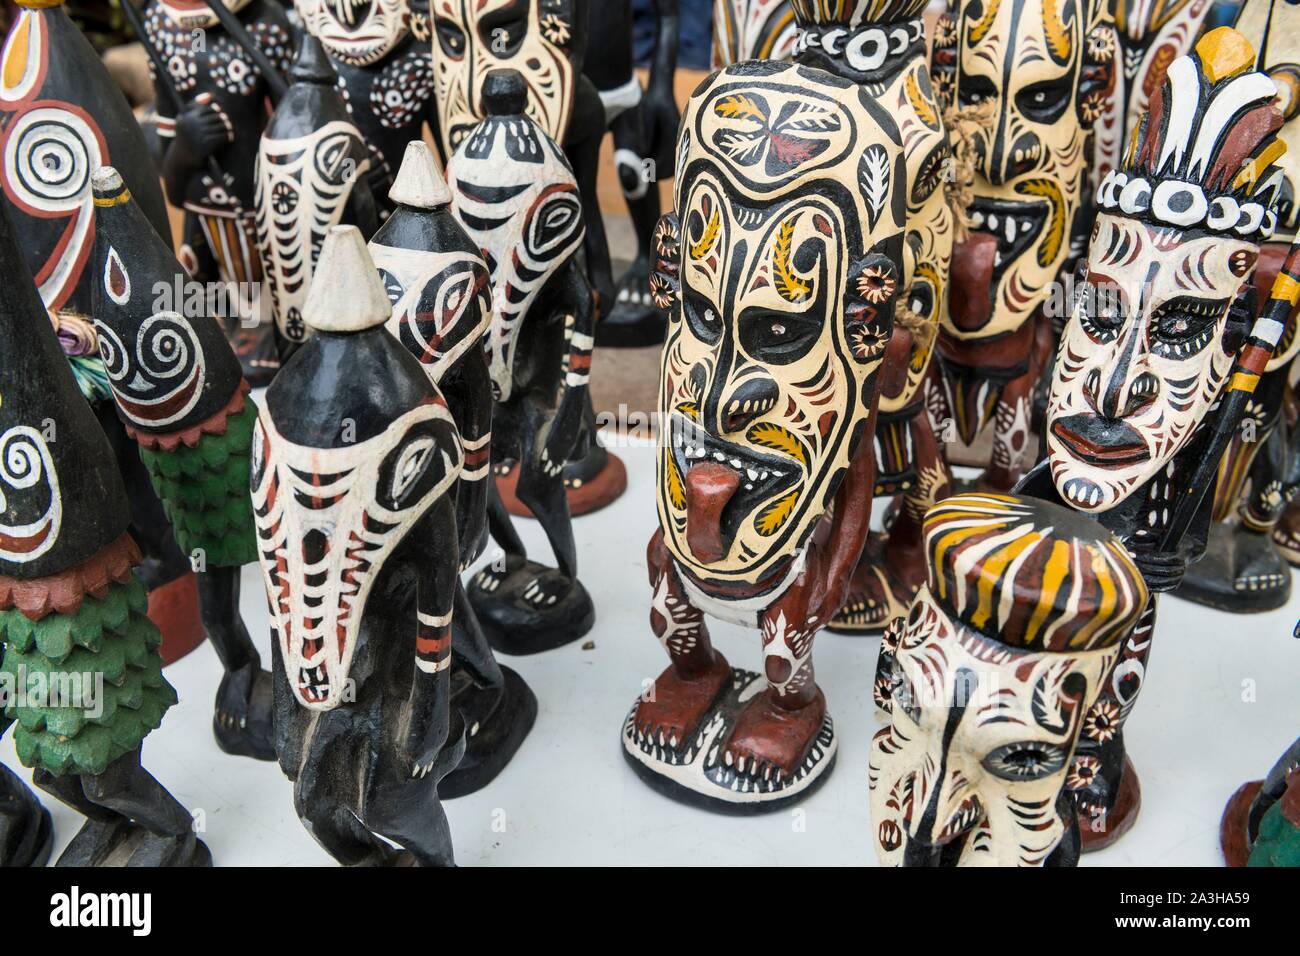 Papua-New-Guinea, National Capital District, Port Moresby, Waigani district, Port moresby Theatre, Monthly craft market, masks for sell Stock Photo